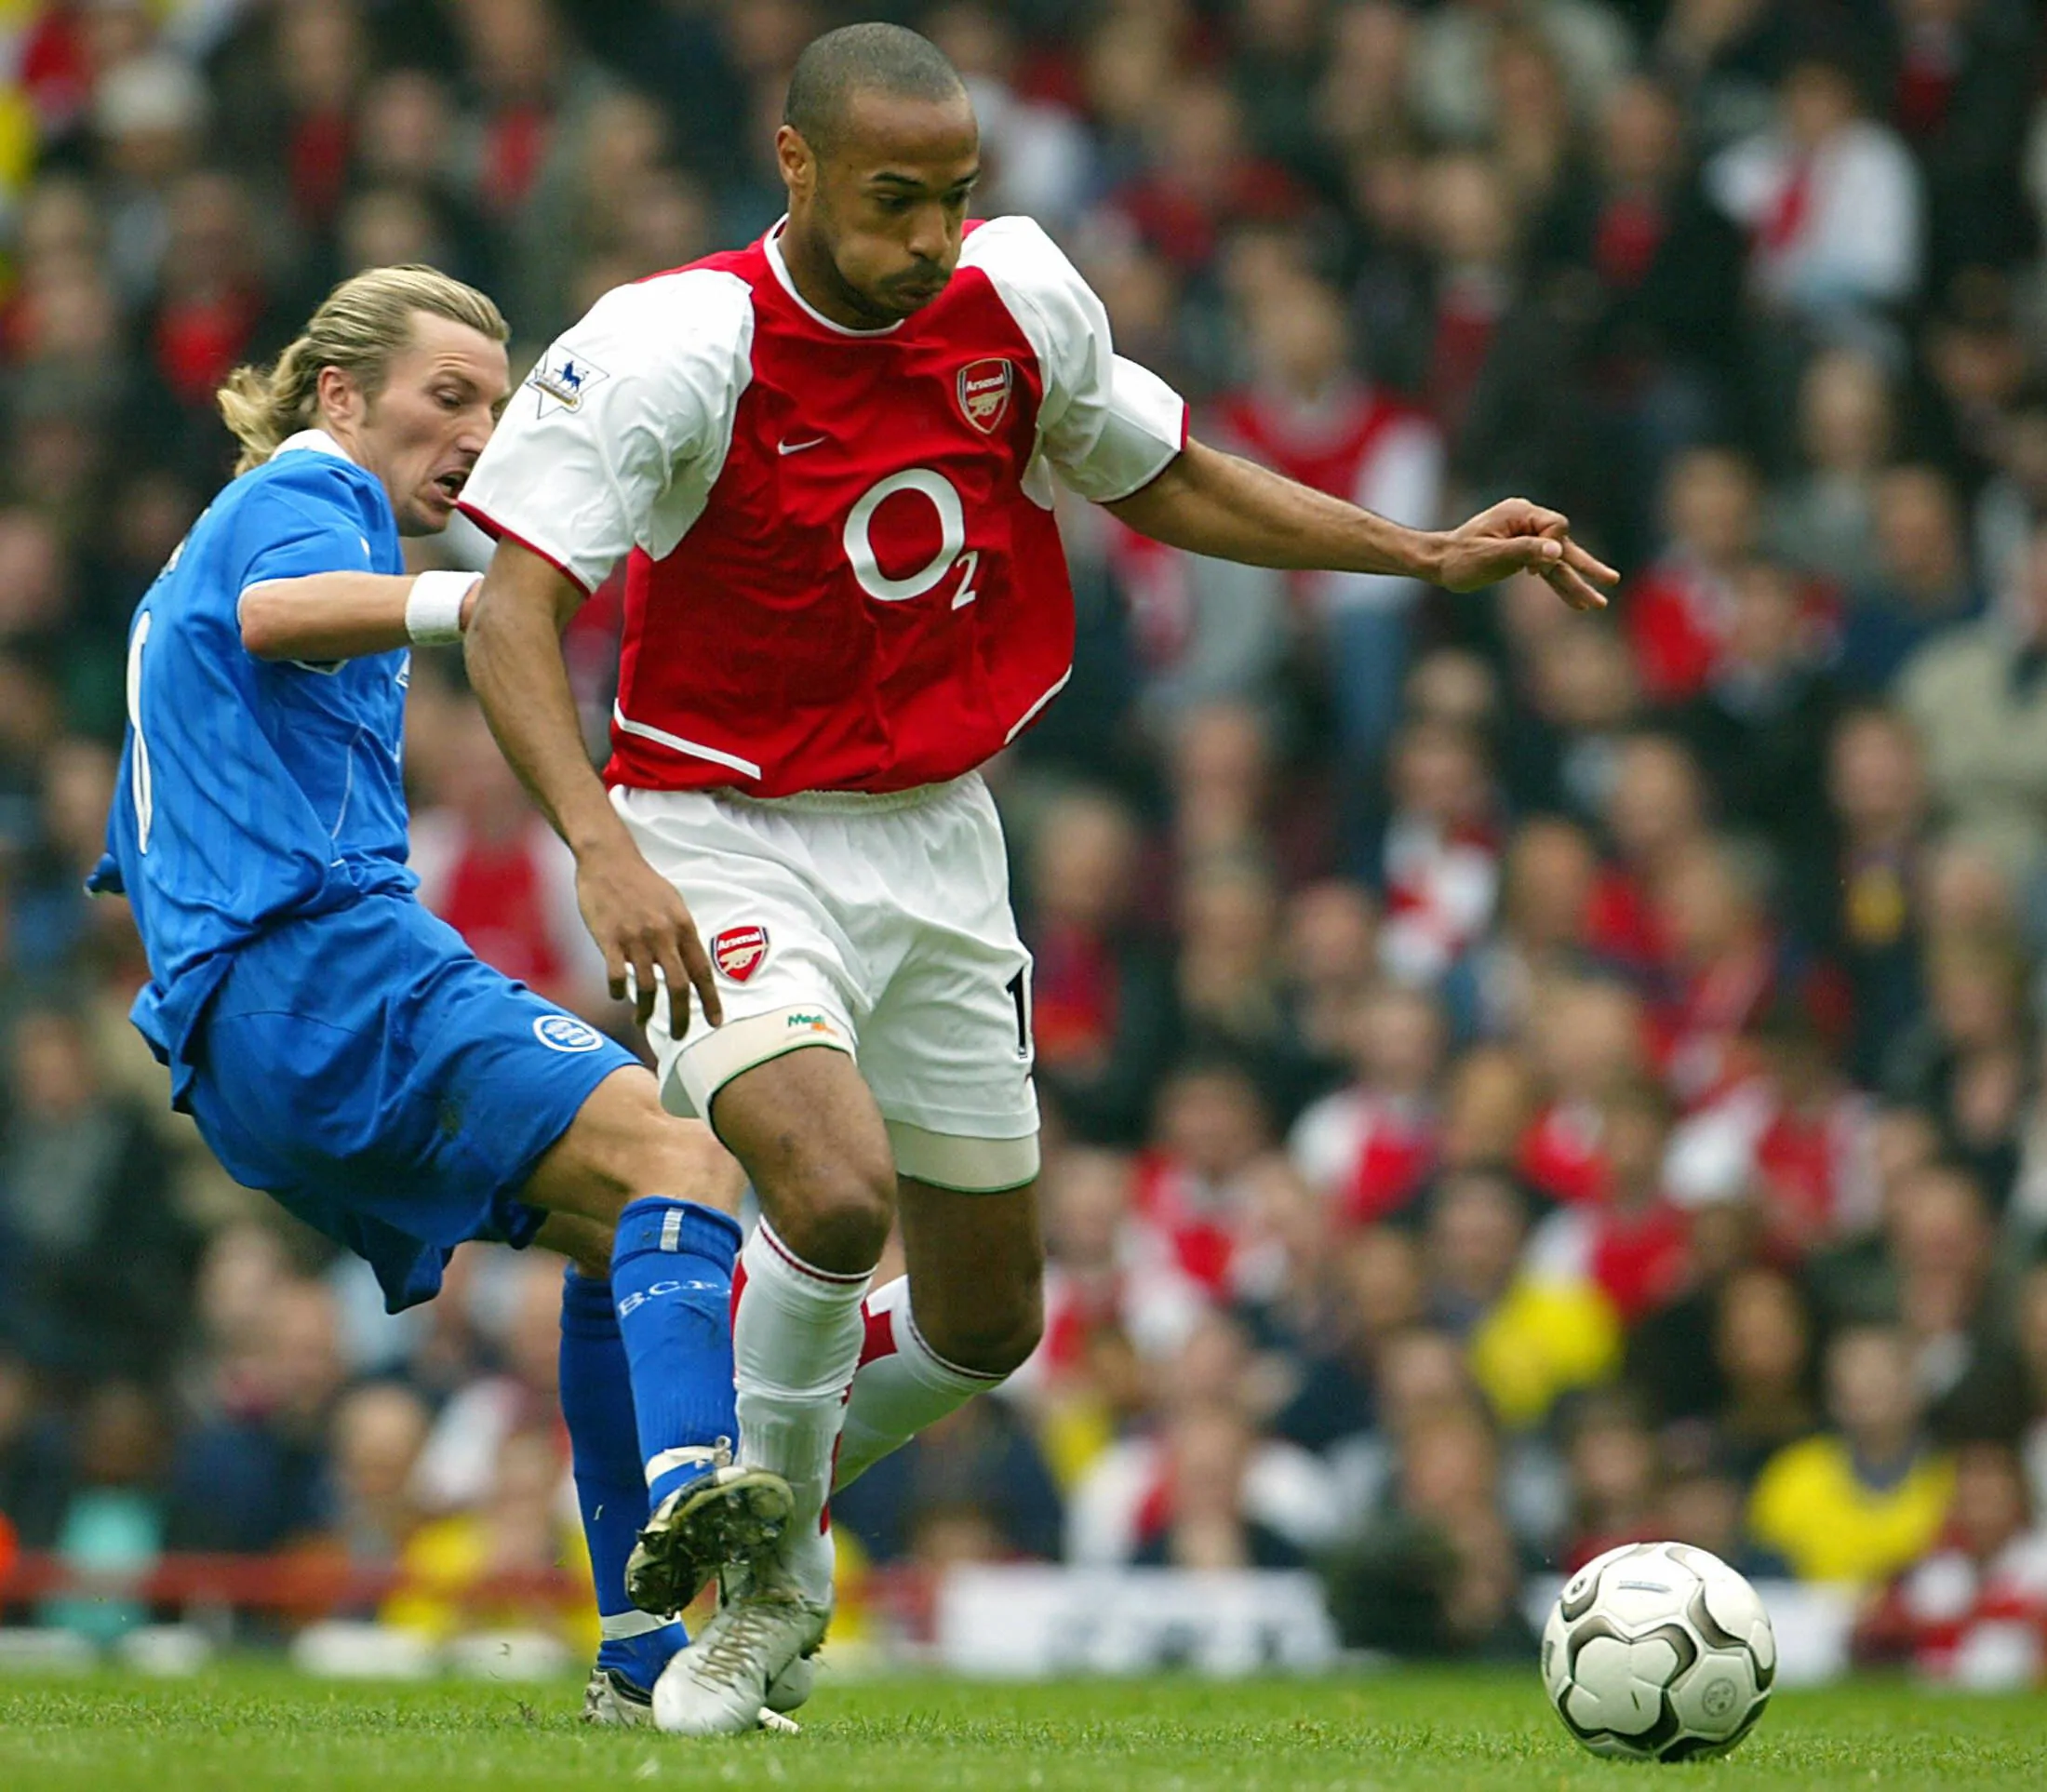 Arsenal's Thierry Henry (R) is challenge